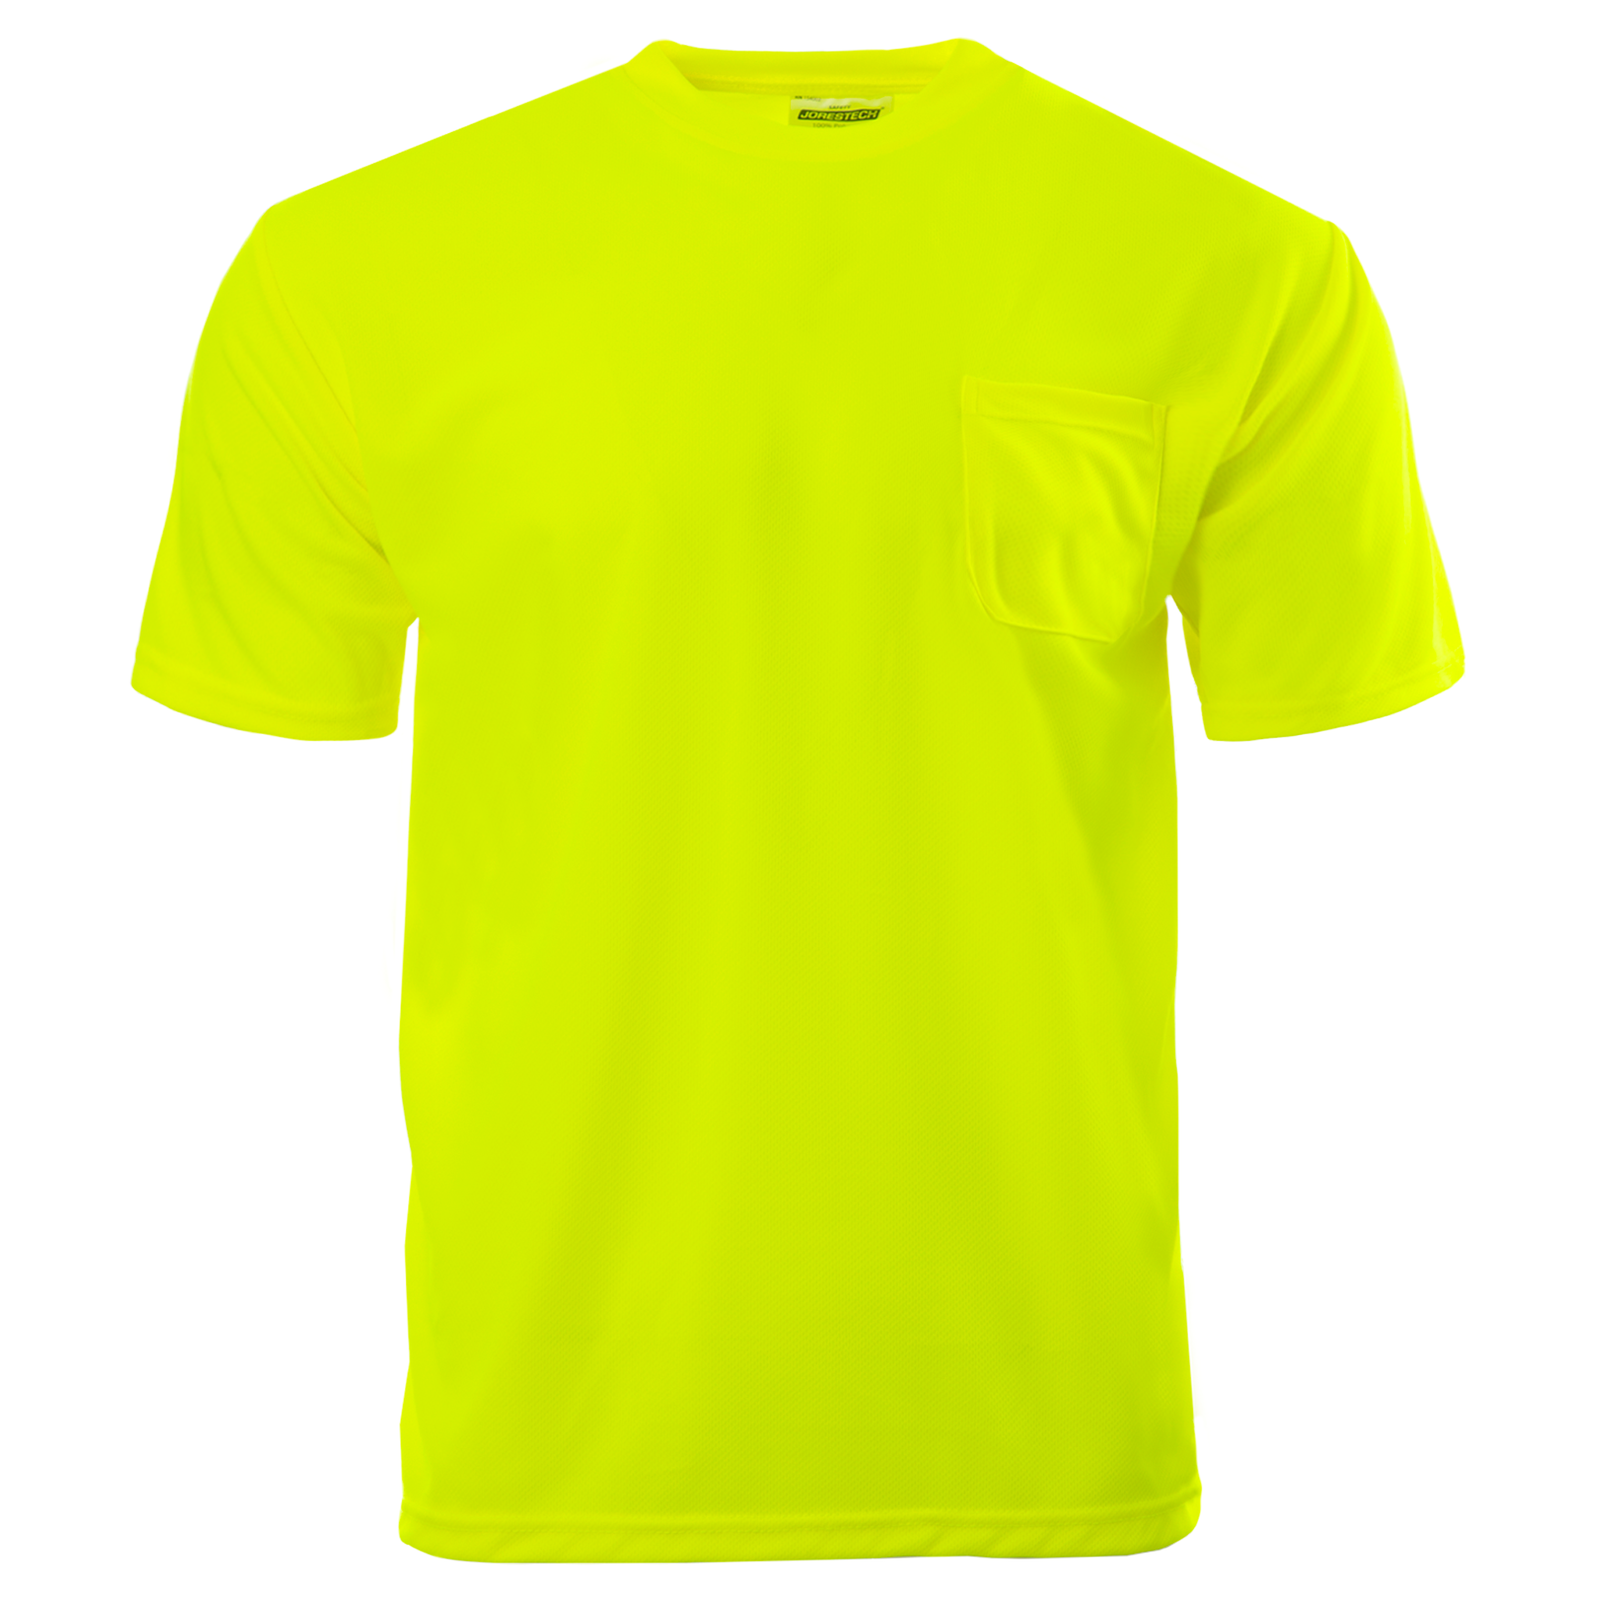 Front view of the Hi-Vis yellow lime short sleeve safety pocket shirt 